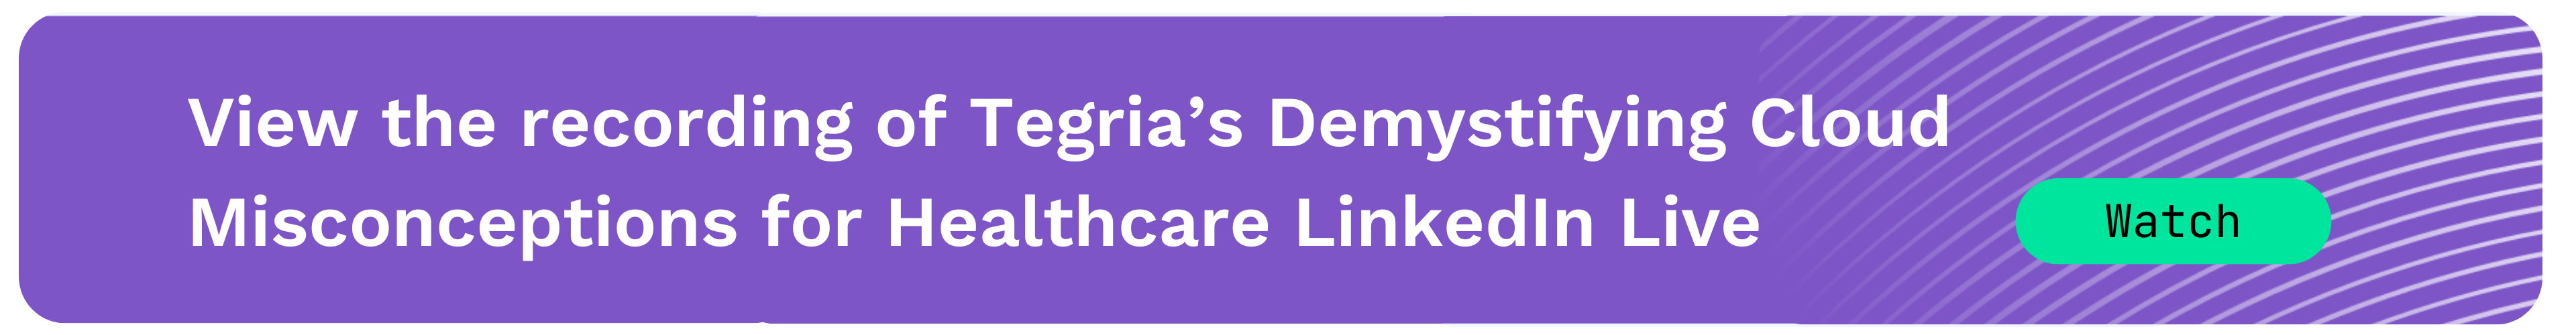 banner-for-demystifying-cloud-misconceptions-for-healthcare